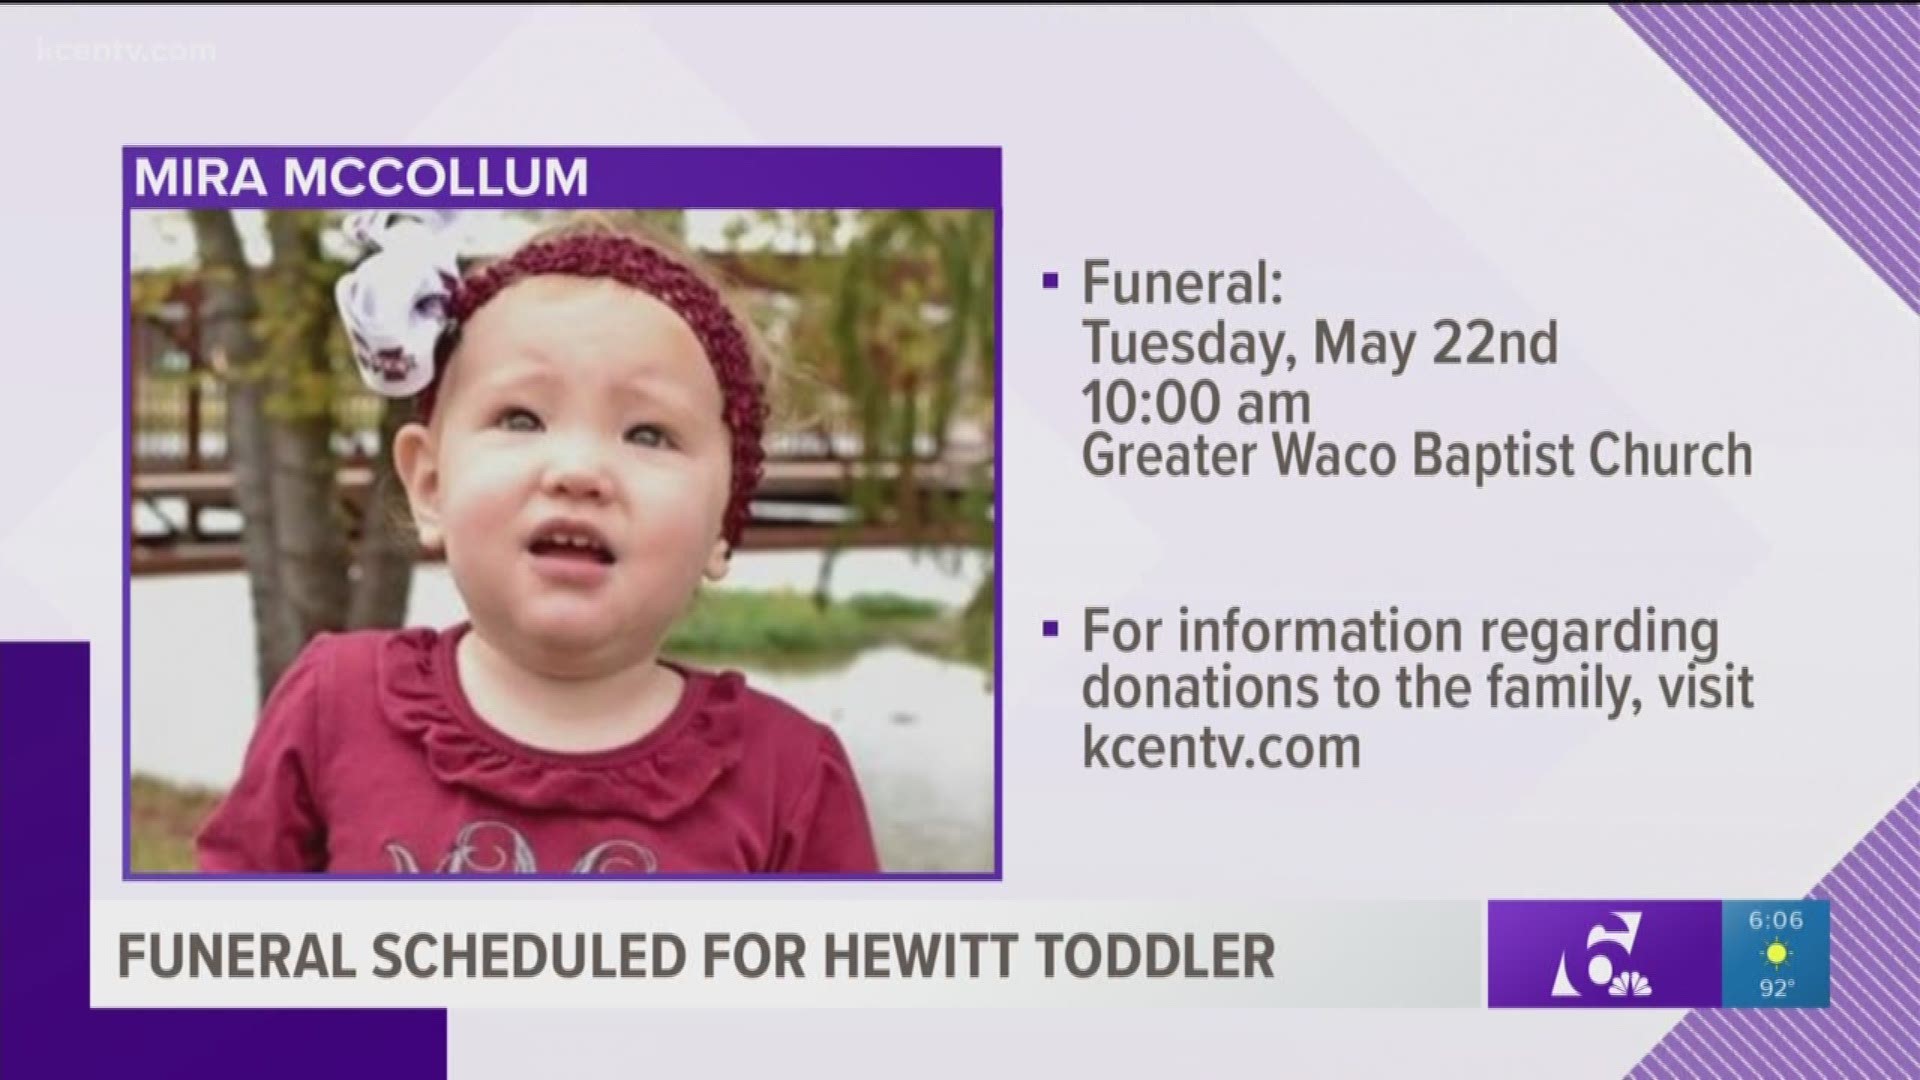 A funeral is scheduled next week for a Hewitt toddler, who died after falling into a swimming pool earlier this week. 